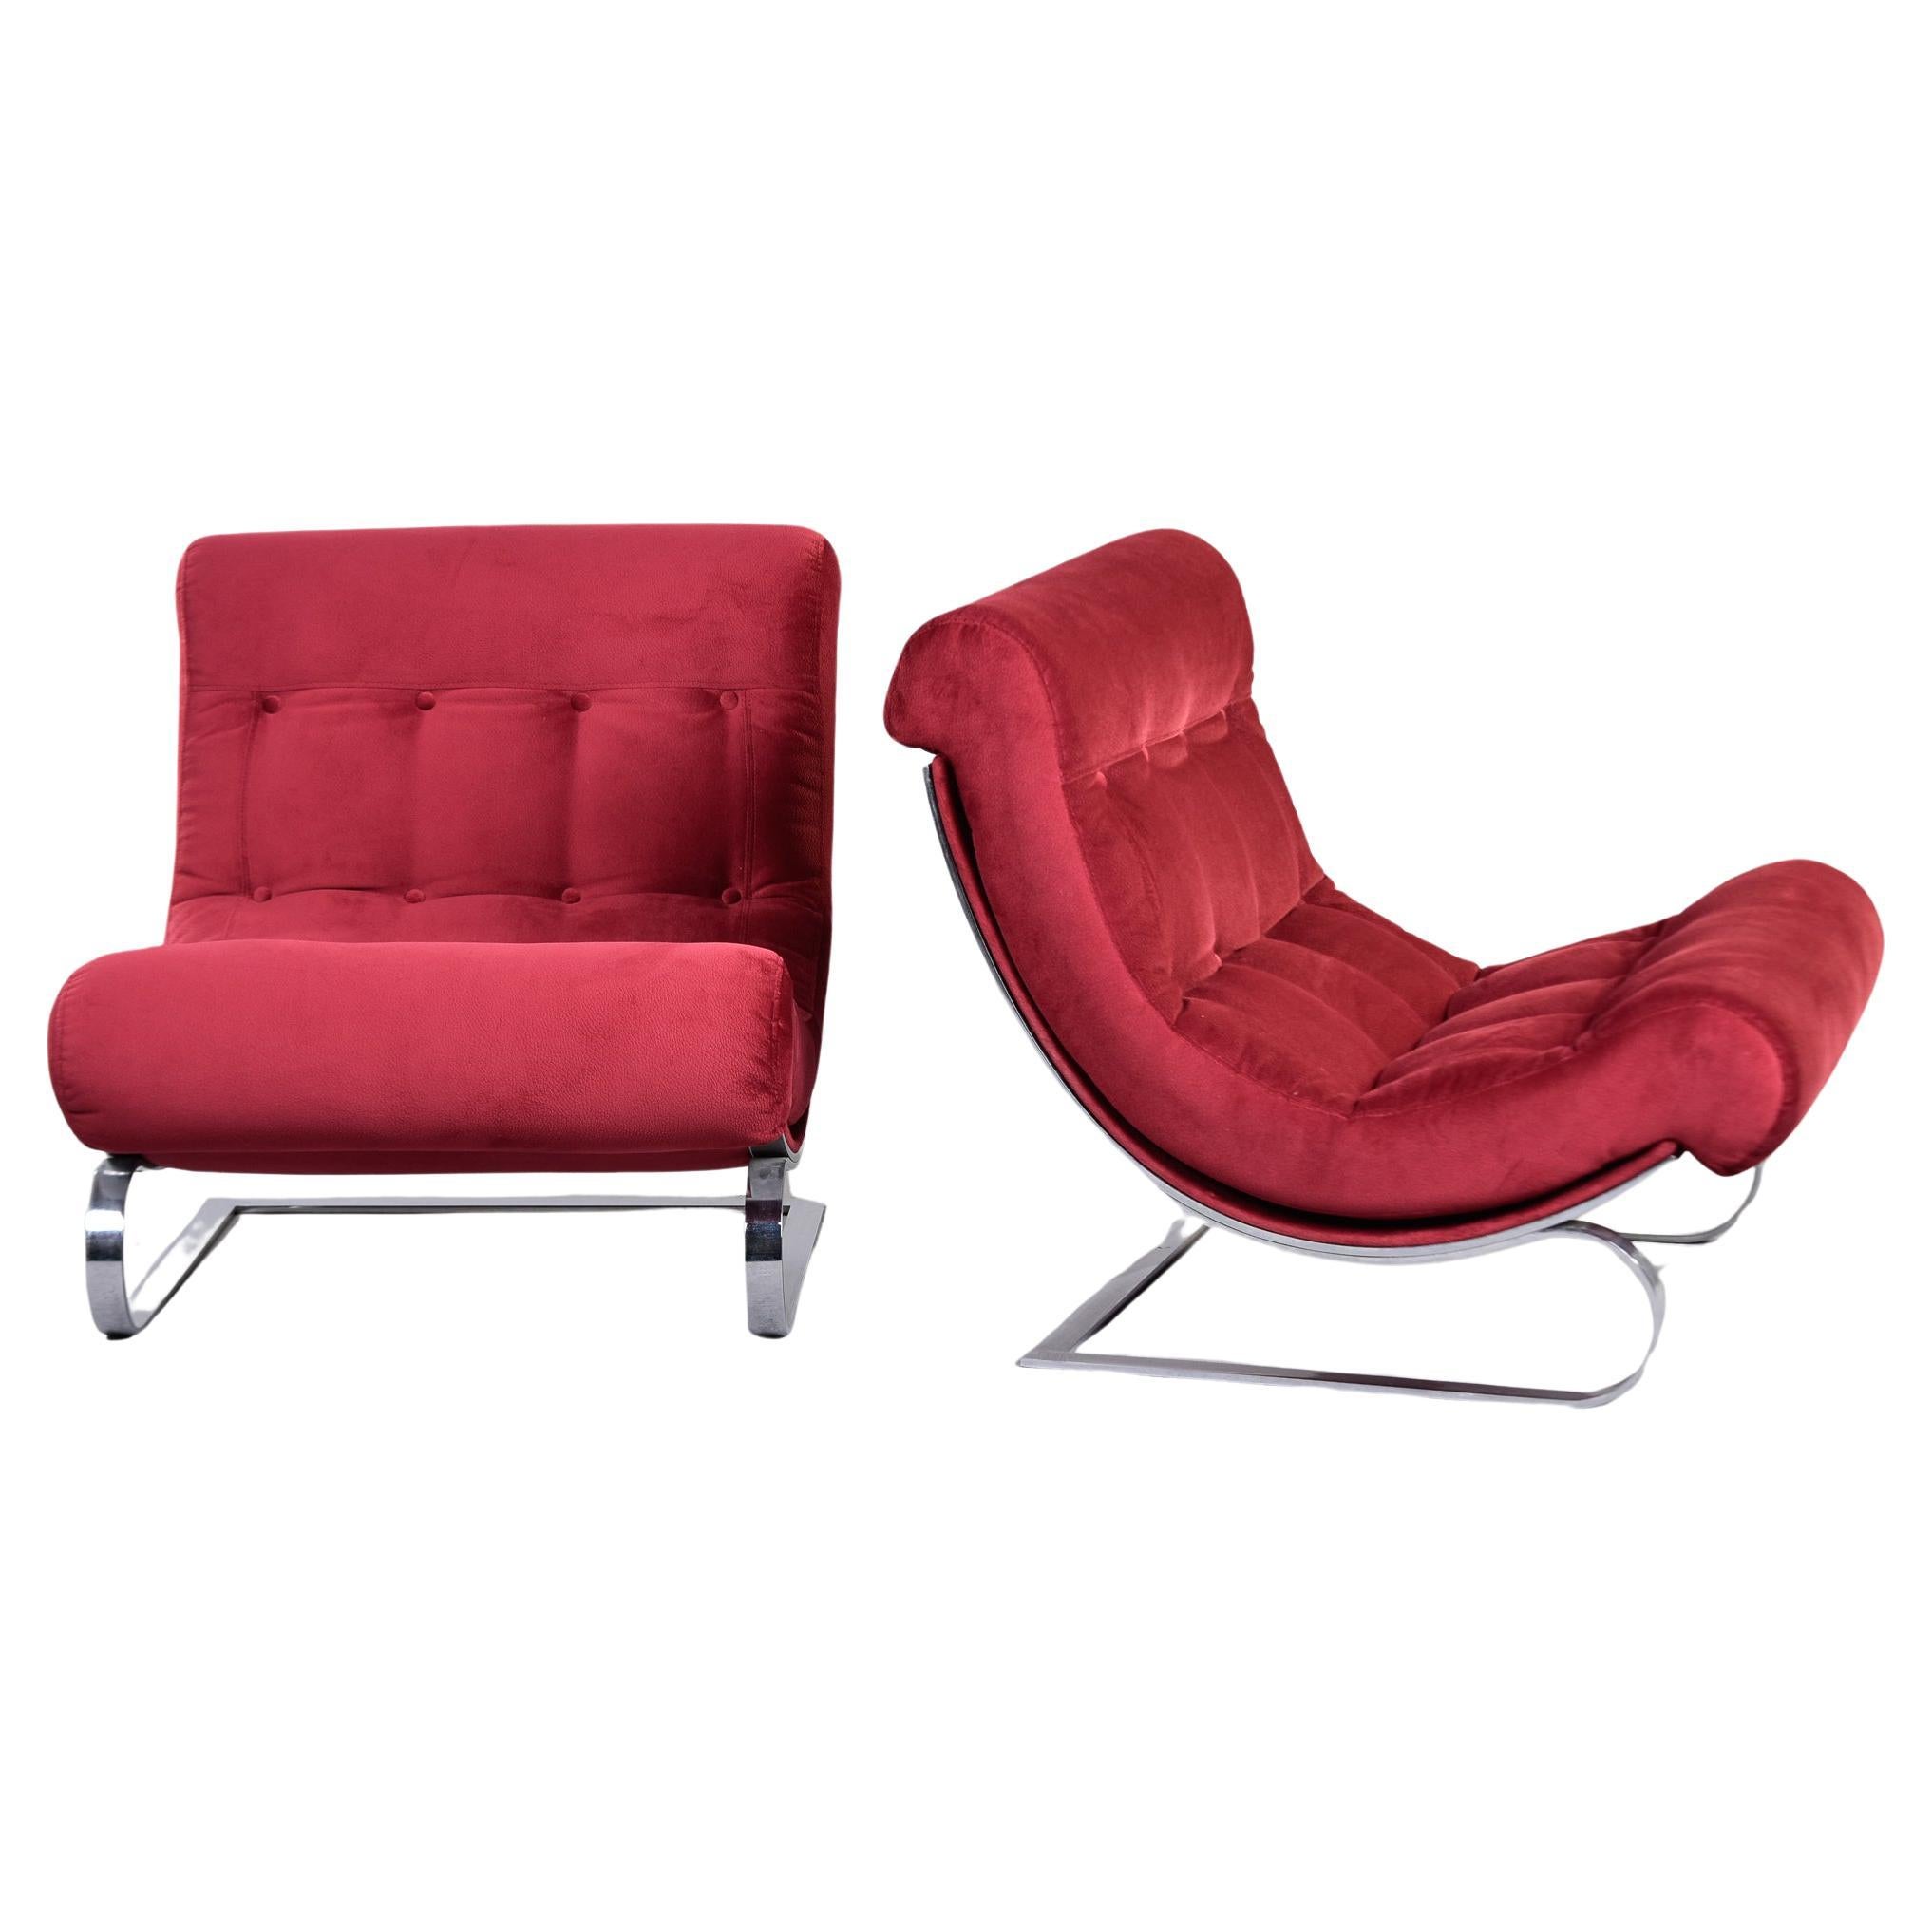 Pair Mid Century Chairs in Red Fabric With Chrome Base